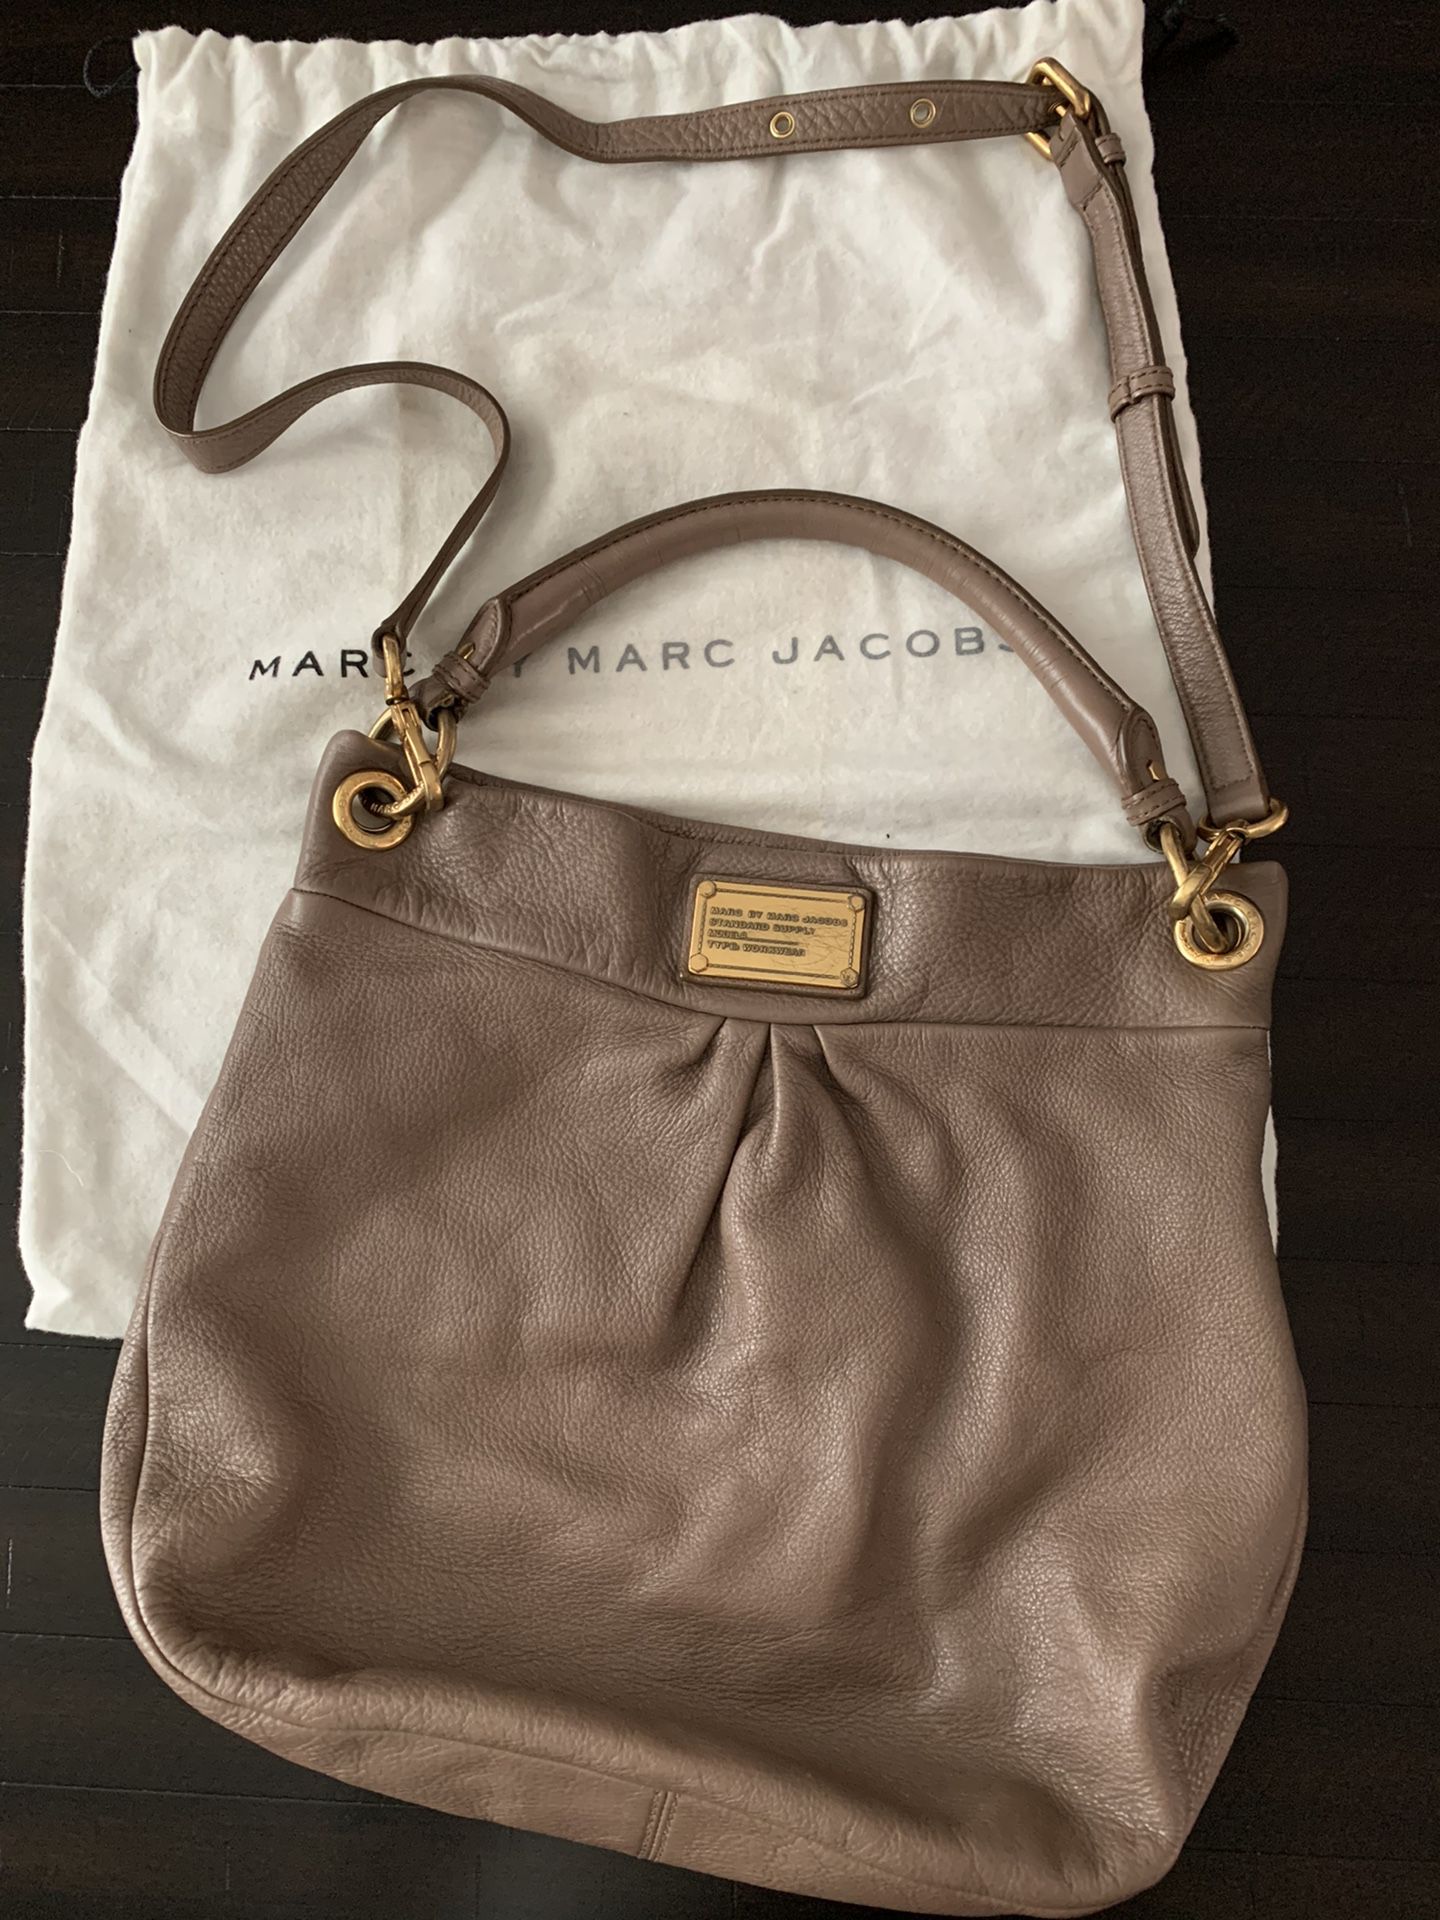 Marc by Marc Jacobs Classic Hillier Leather Bag